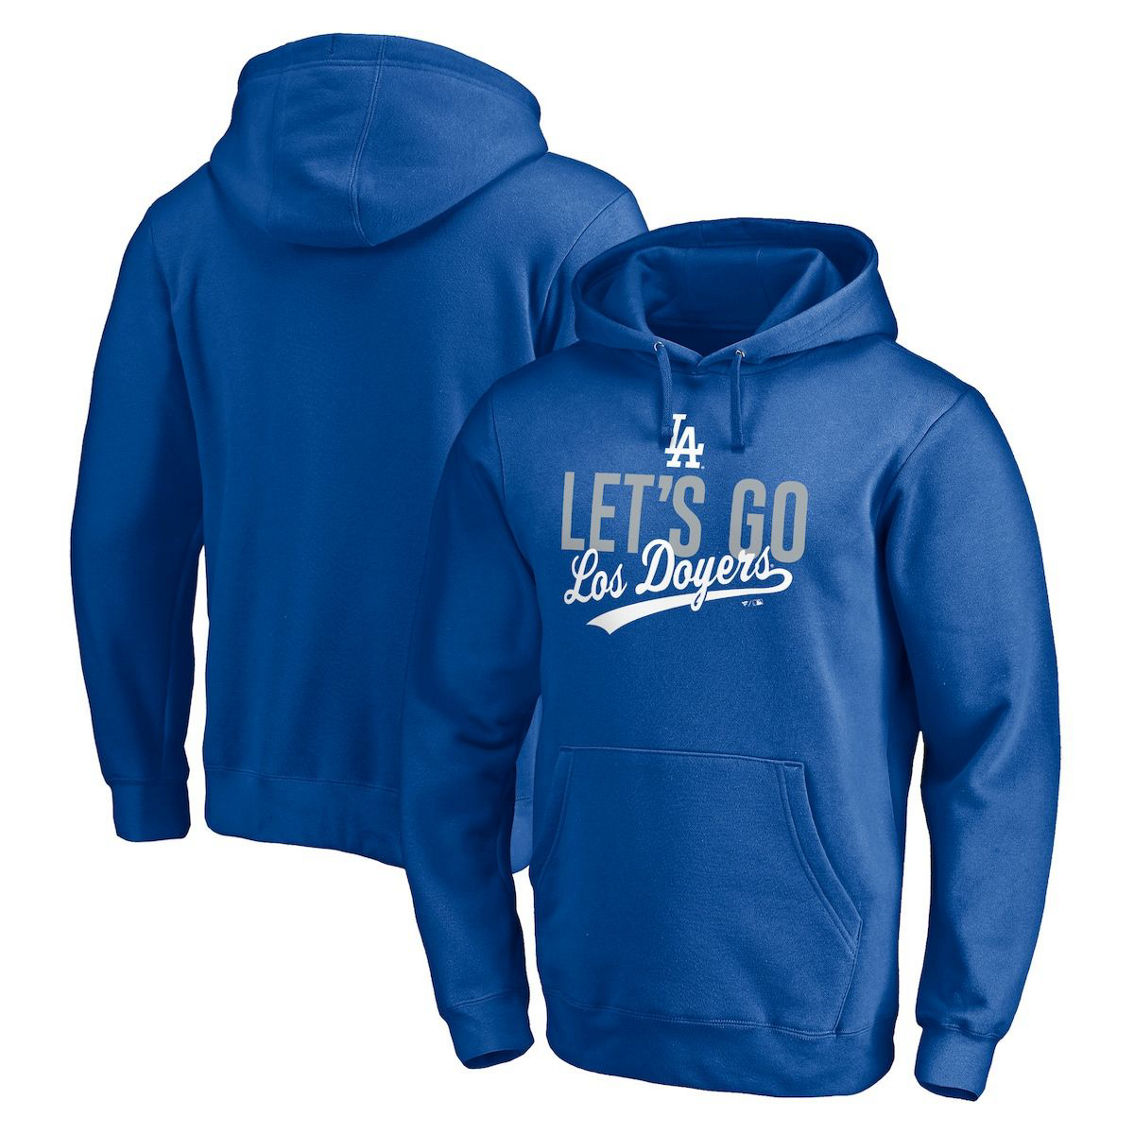 Men's Fanatics Branded Royal Los Angeles Dodgers Hometown Los Doyers Fitted Pullover Hoodie - Image 2 of 4